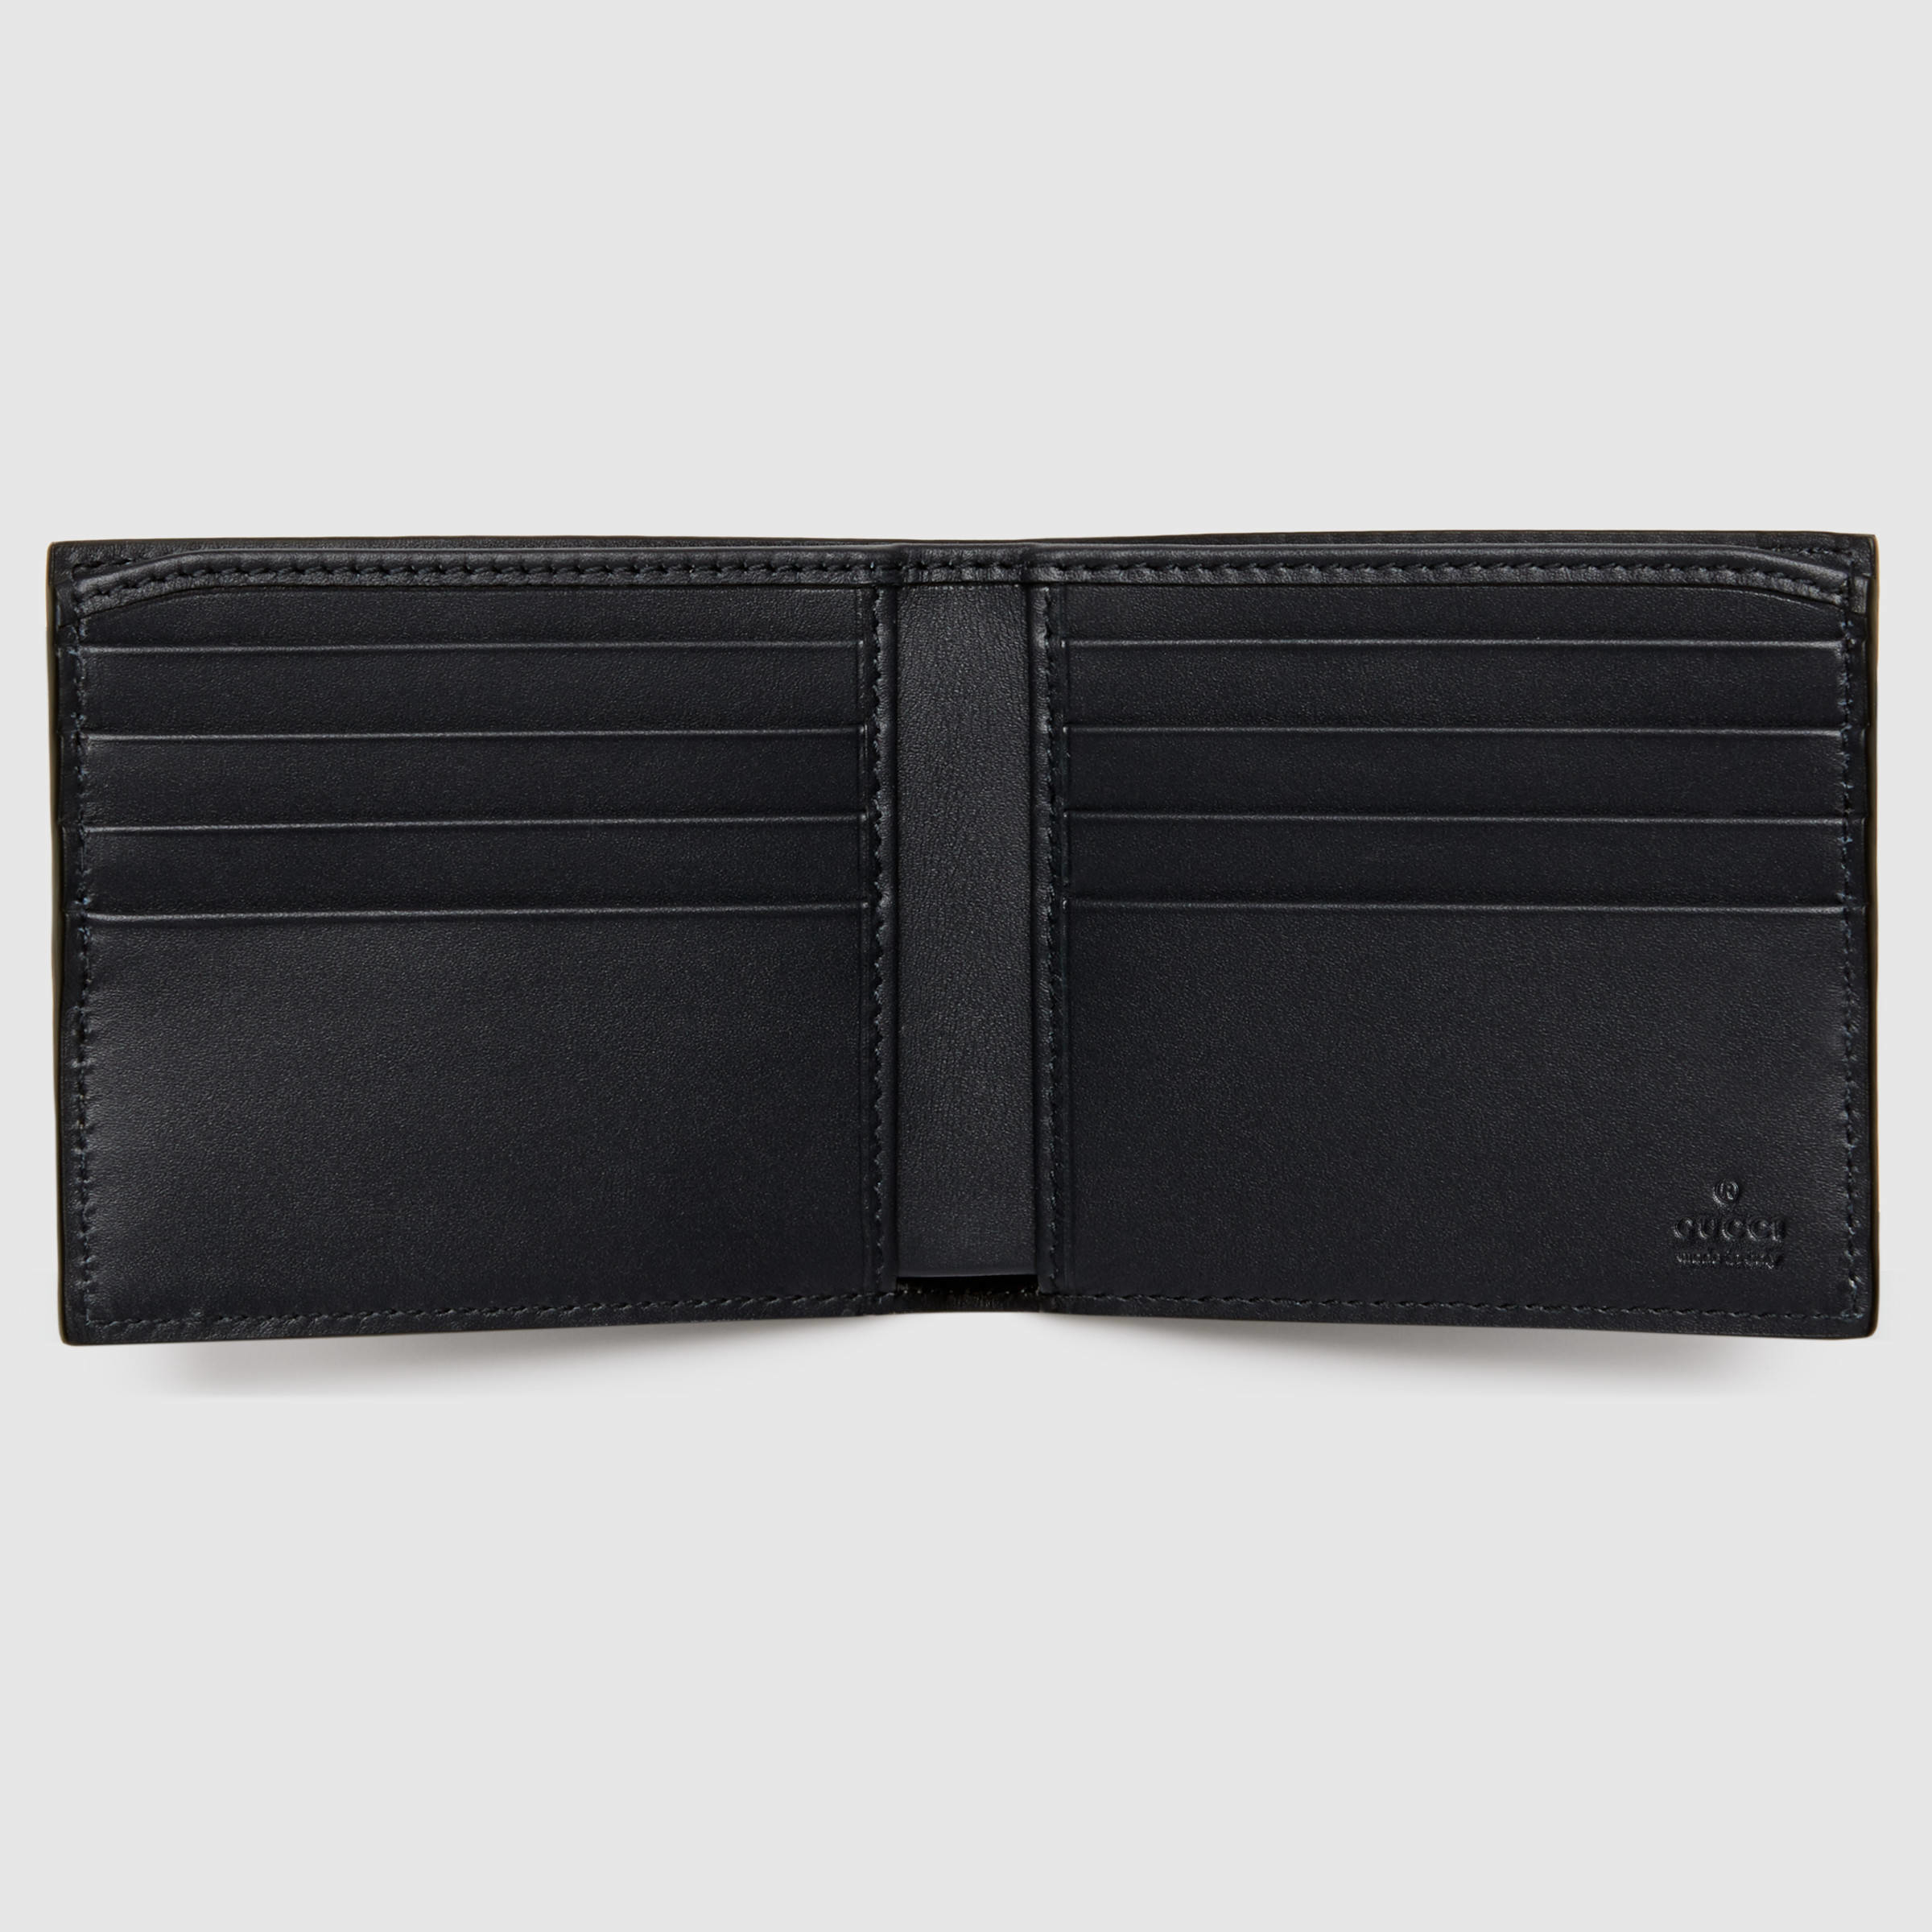 Lyst - Gucci Jolly Gg Supreme Wallet in Blue for Men